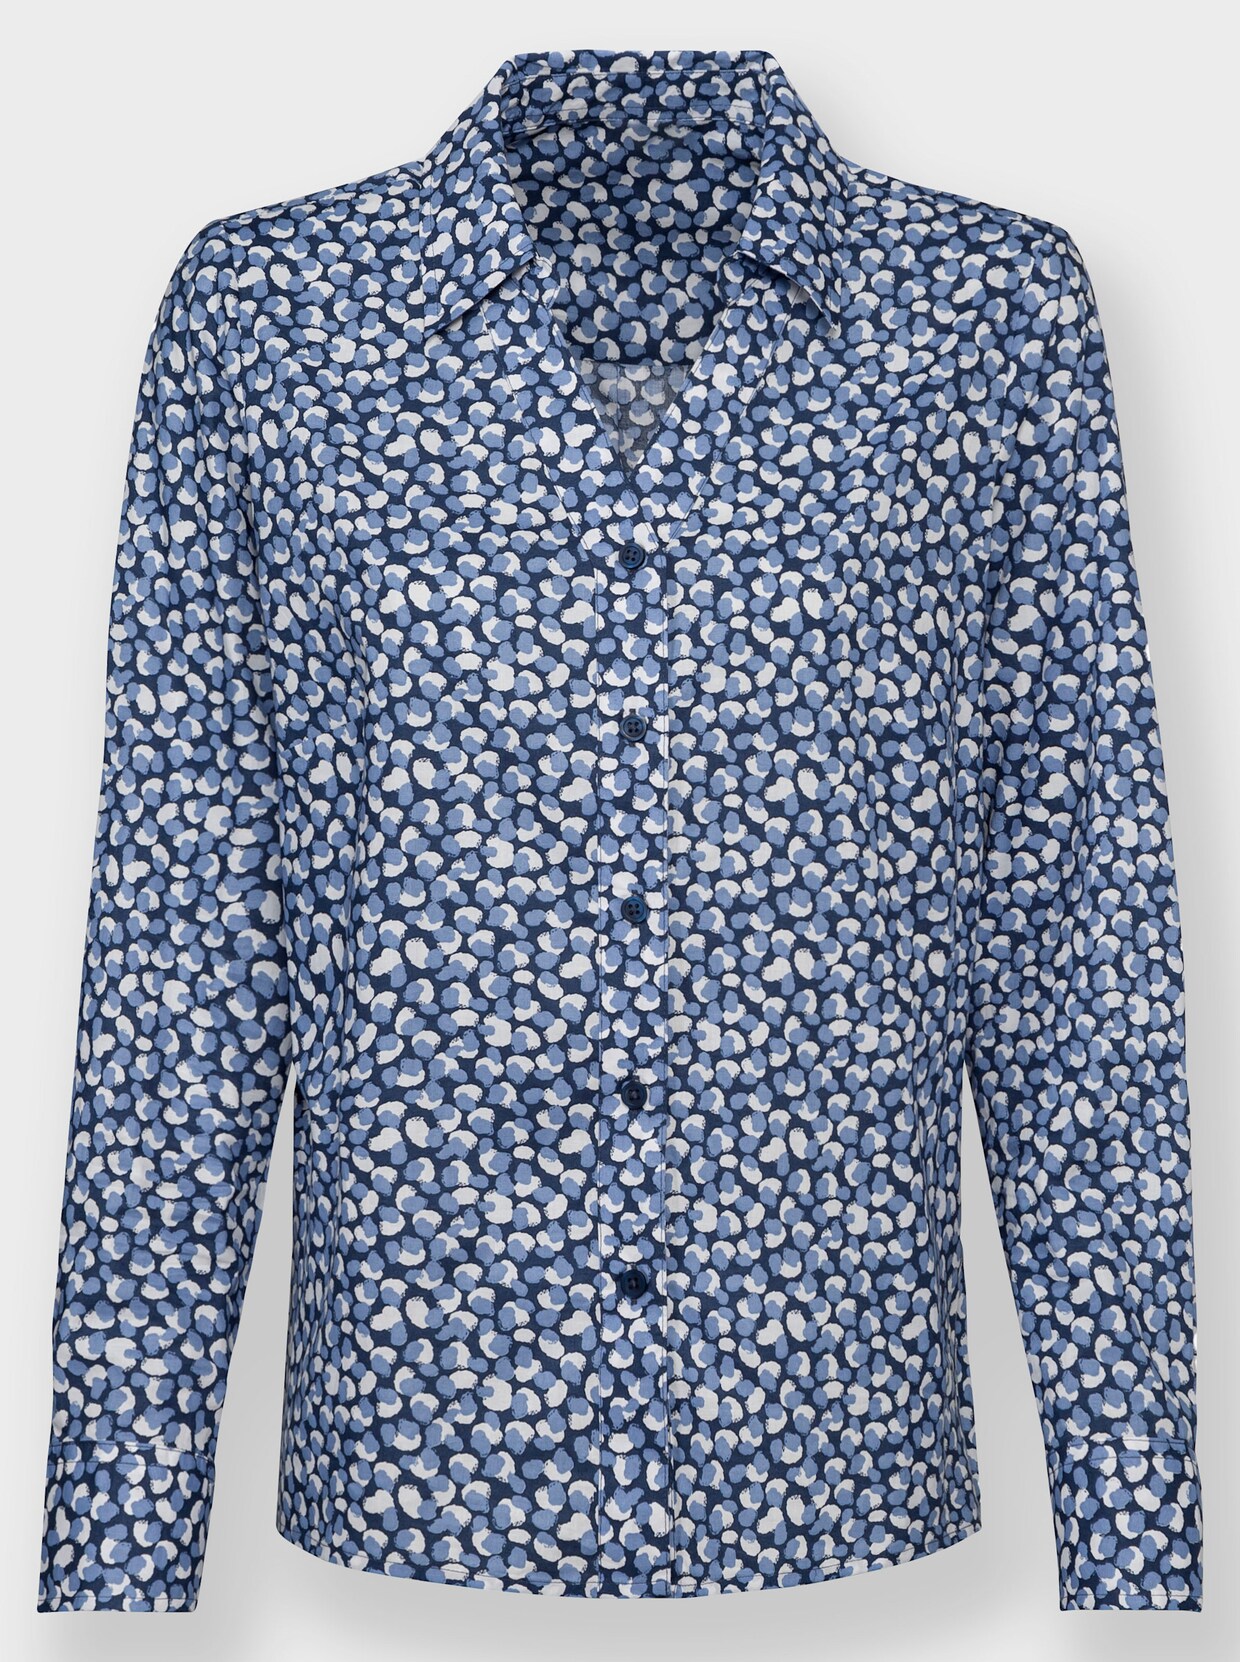 Blouse - donkerblauw geprint